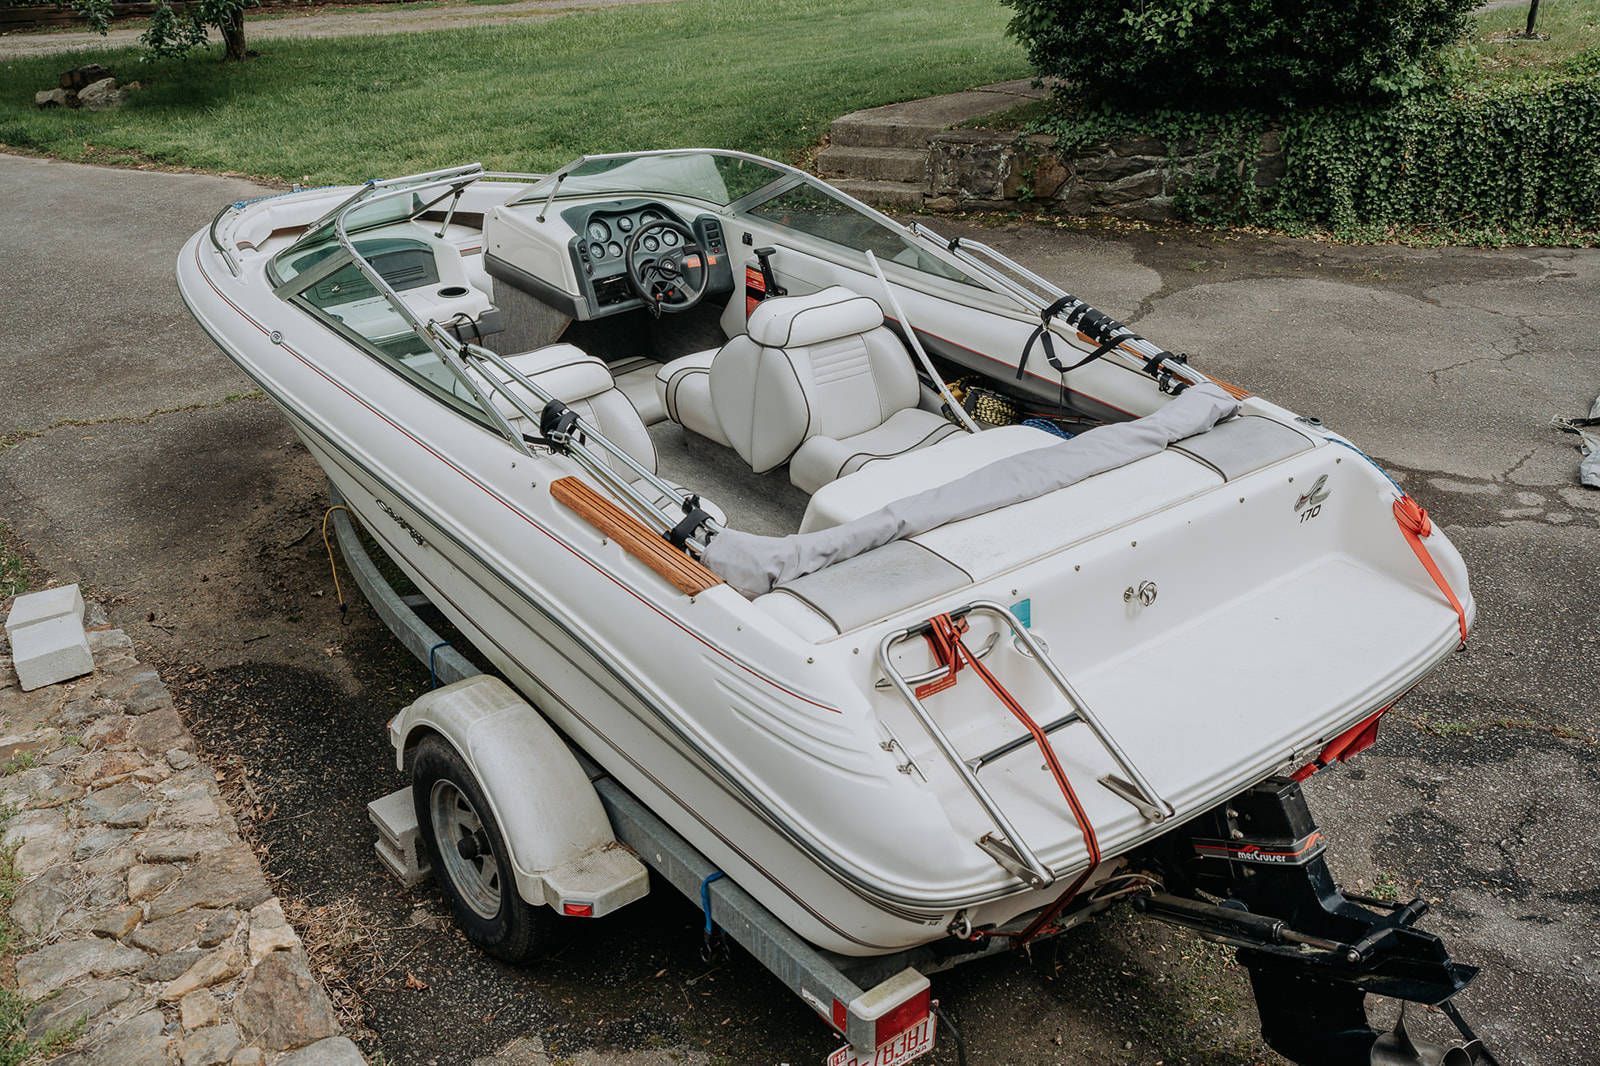 1991 Sea Ray 170 Bowrider Power boat for sale in Asheville, NC - image 12 